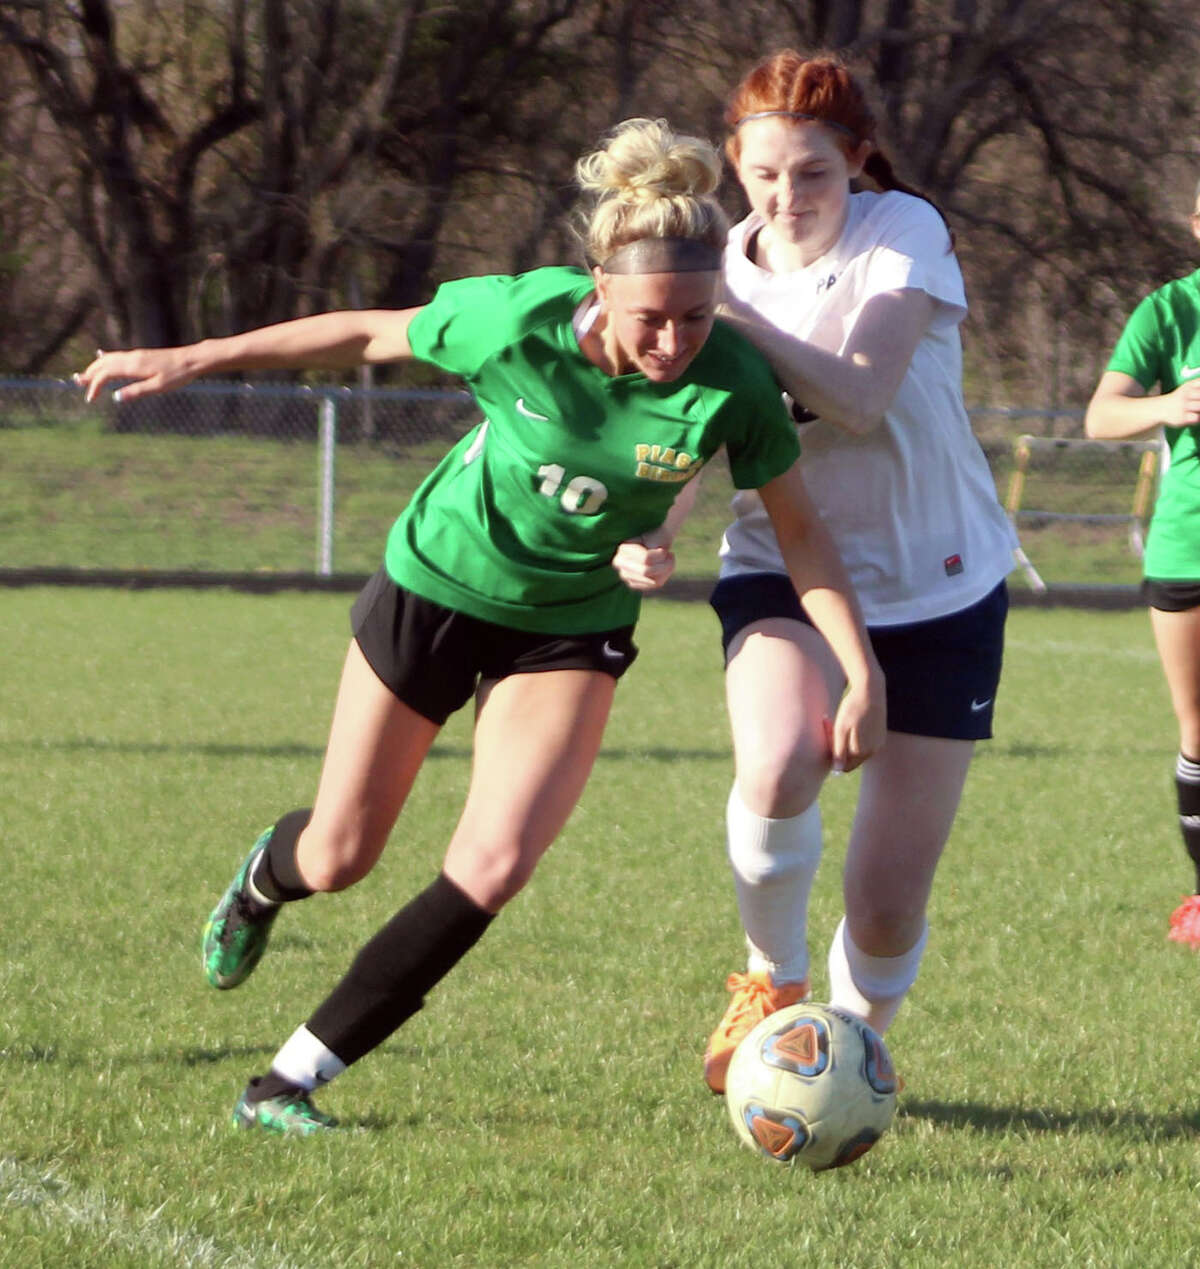 Morgan Durham of Southwestern (10) scored a pair of goals Friday and helped lead the Piasa Birds to a 4-0 victory over Auburn. She is shown in action earlier this season against Pana.